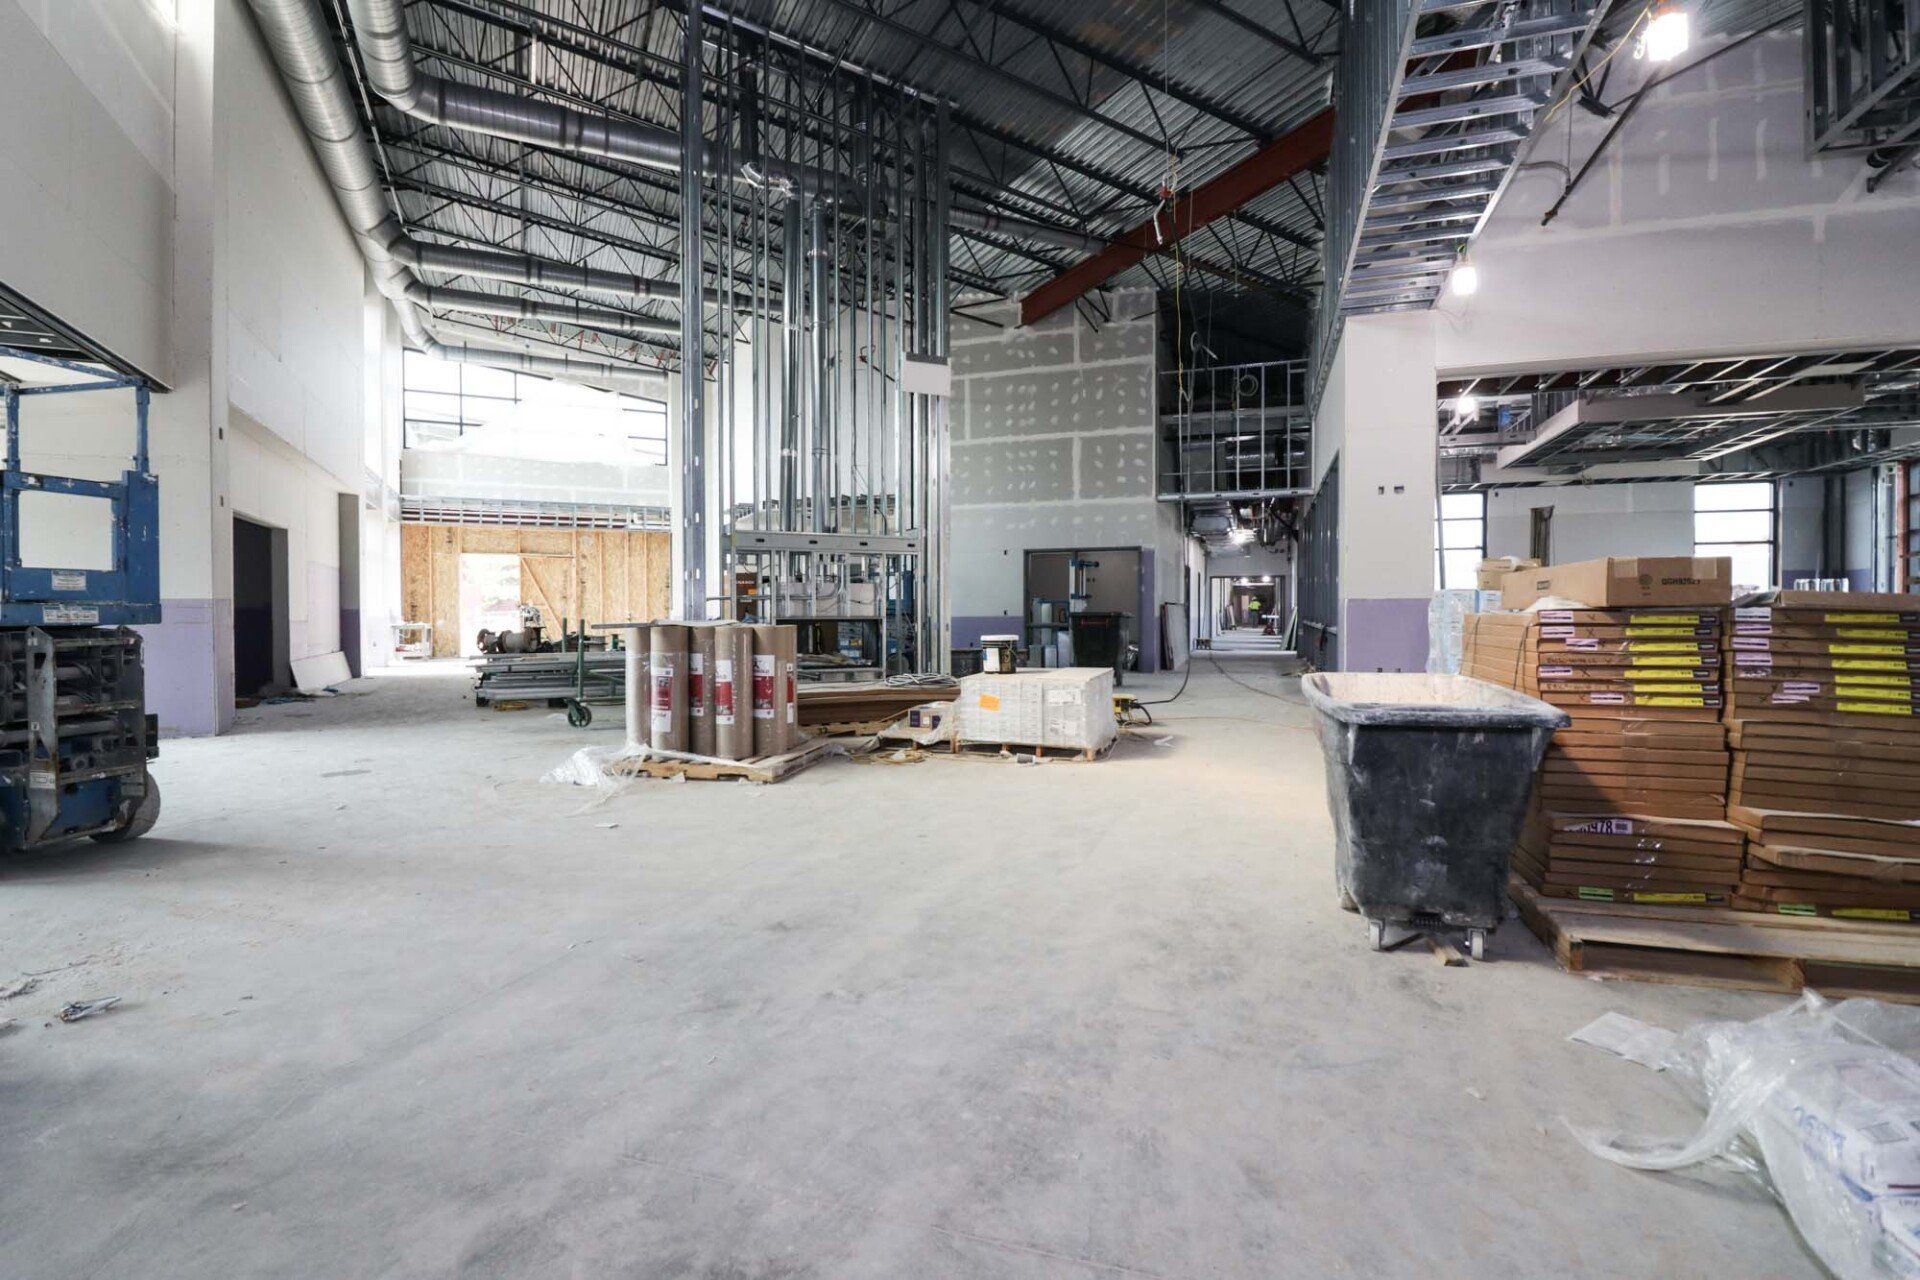 Large common area under construction